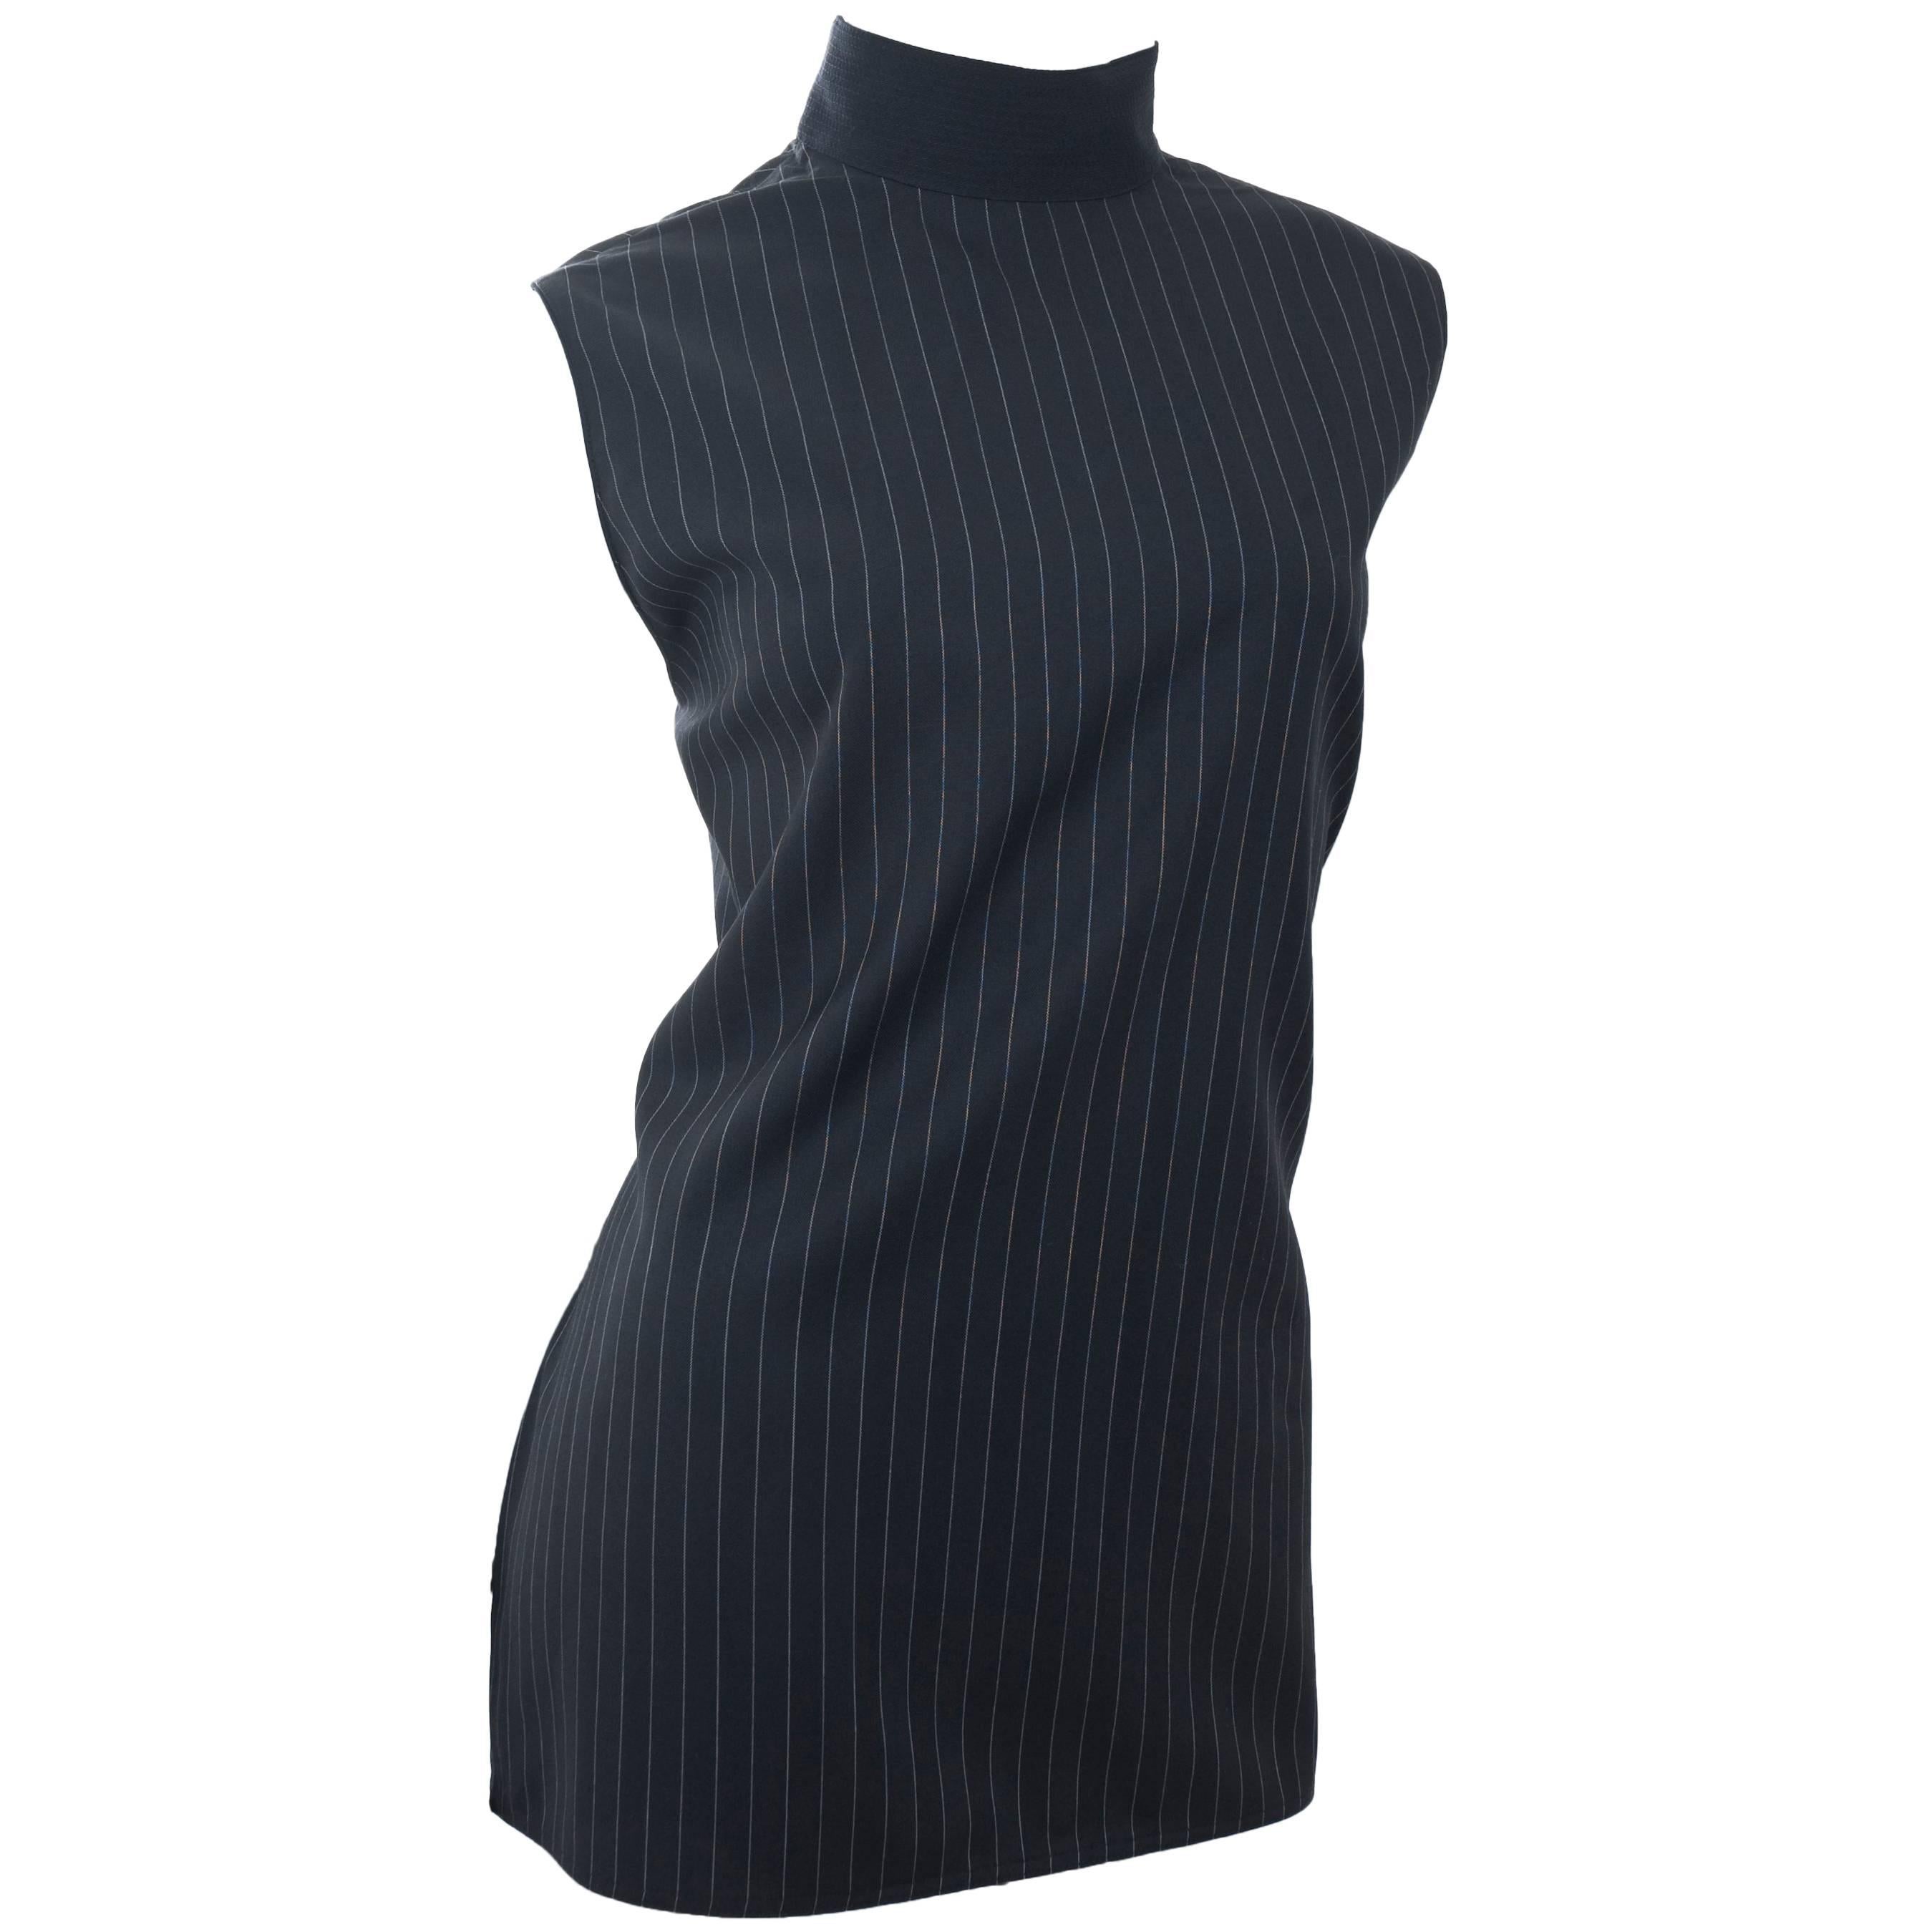 90s Gianni Versace COUTURE Wool & Silk Top in Black & White Stripes For Sale